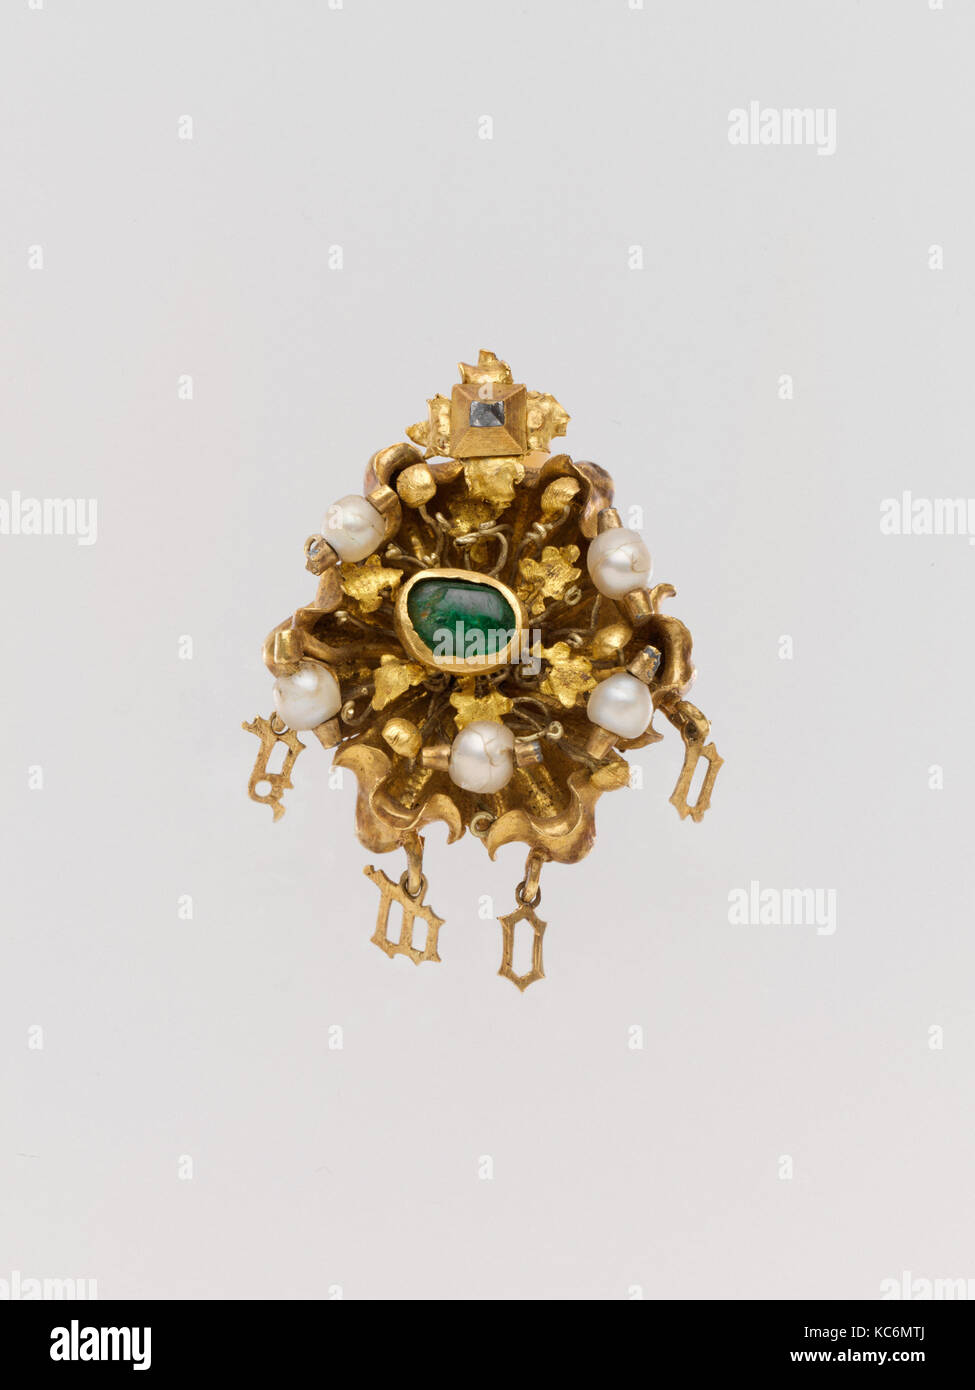 Cluster Brooch with Letters Spelling "Amor", mid-15th century Stock Photo